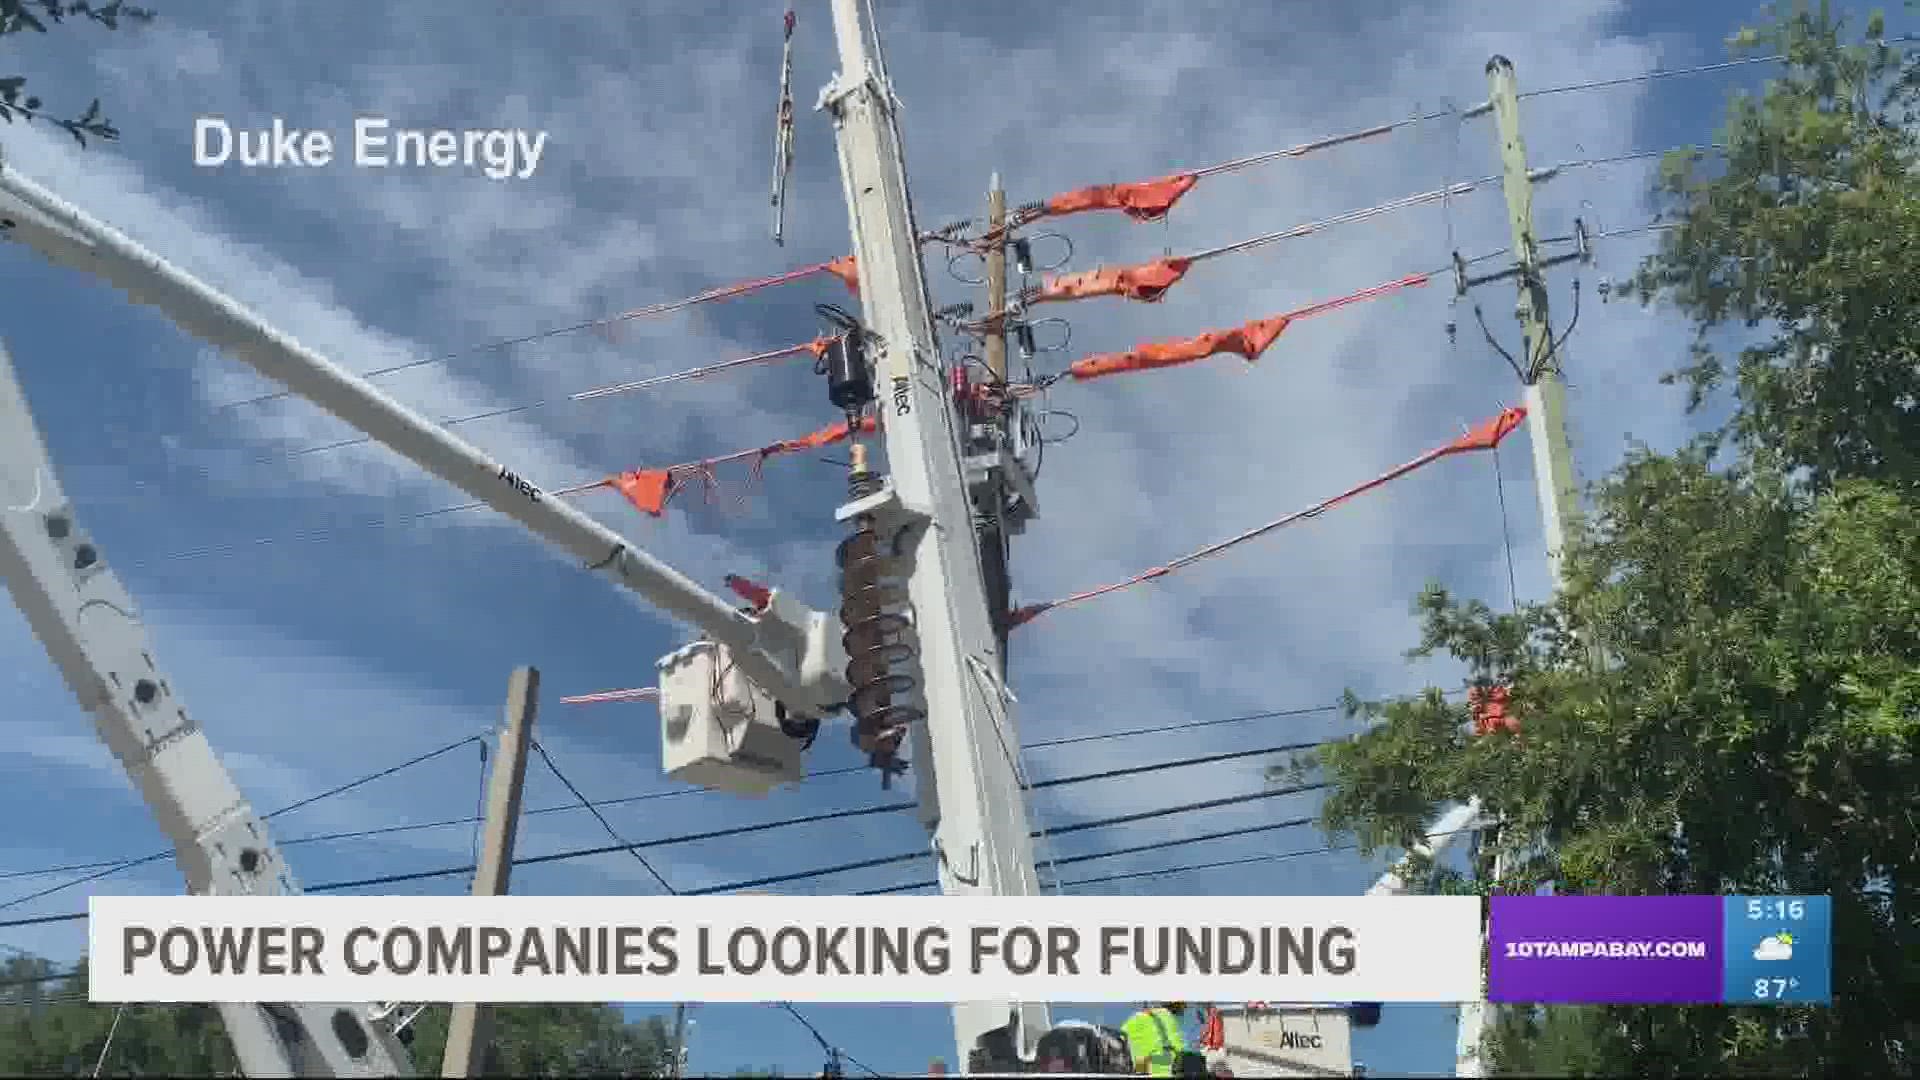 Three companies in the state are looking to strengthen their power grids and are asking for millions of dollars to try and up storm resiliency.